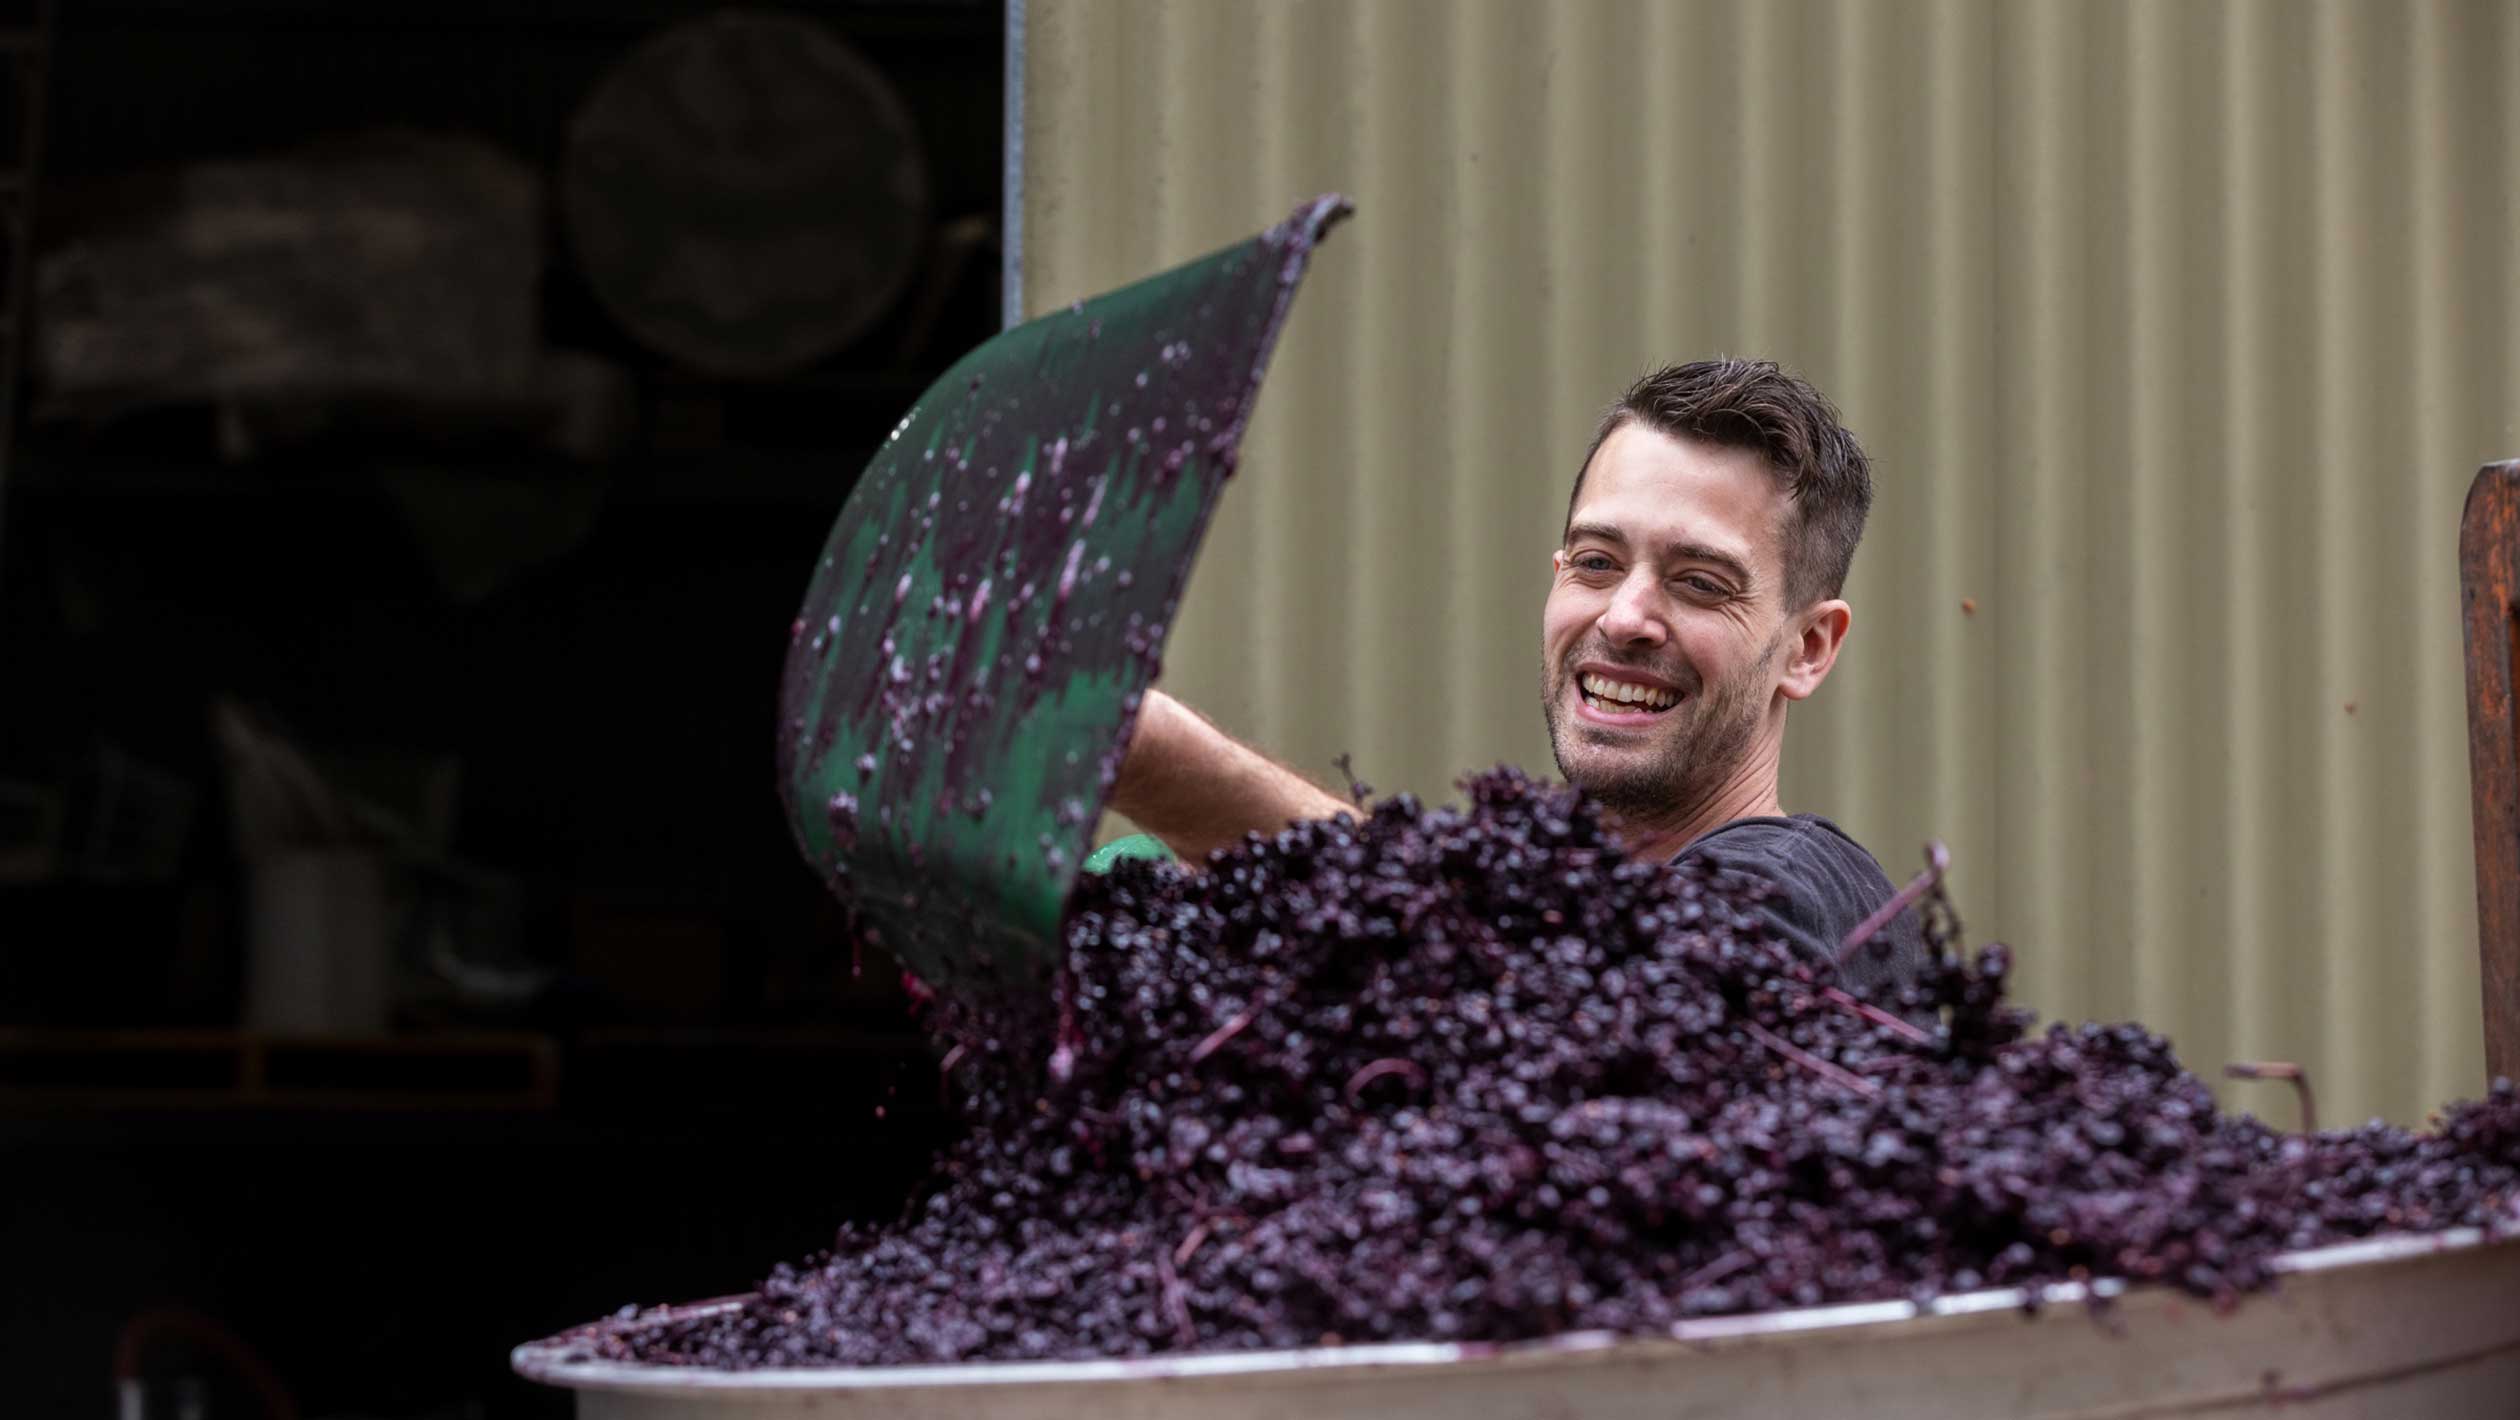 Sebastian Hardy of Living Roots Wine Co mid-winemaking-process, surveying grapes